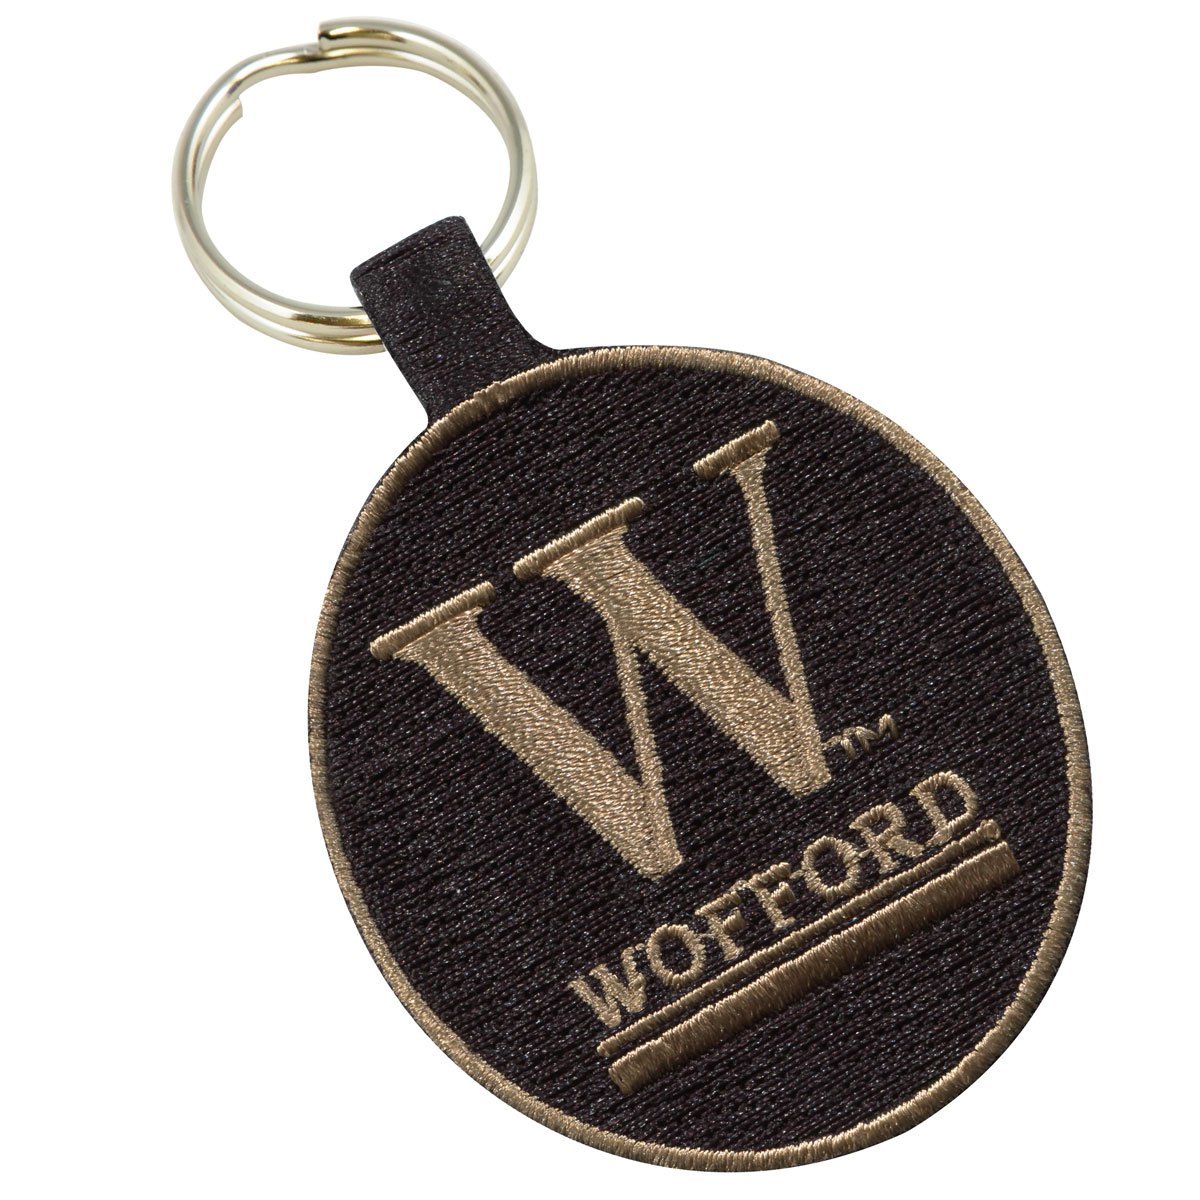 Primary image for The Alumni Association NCAA Wofford Terriers Key Ring